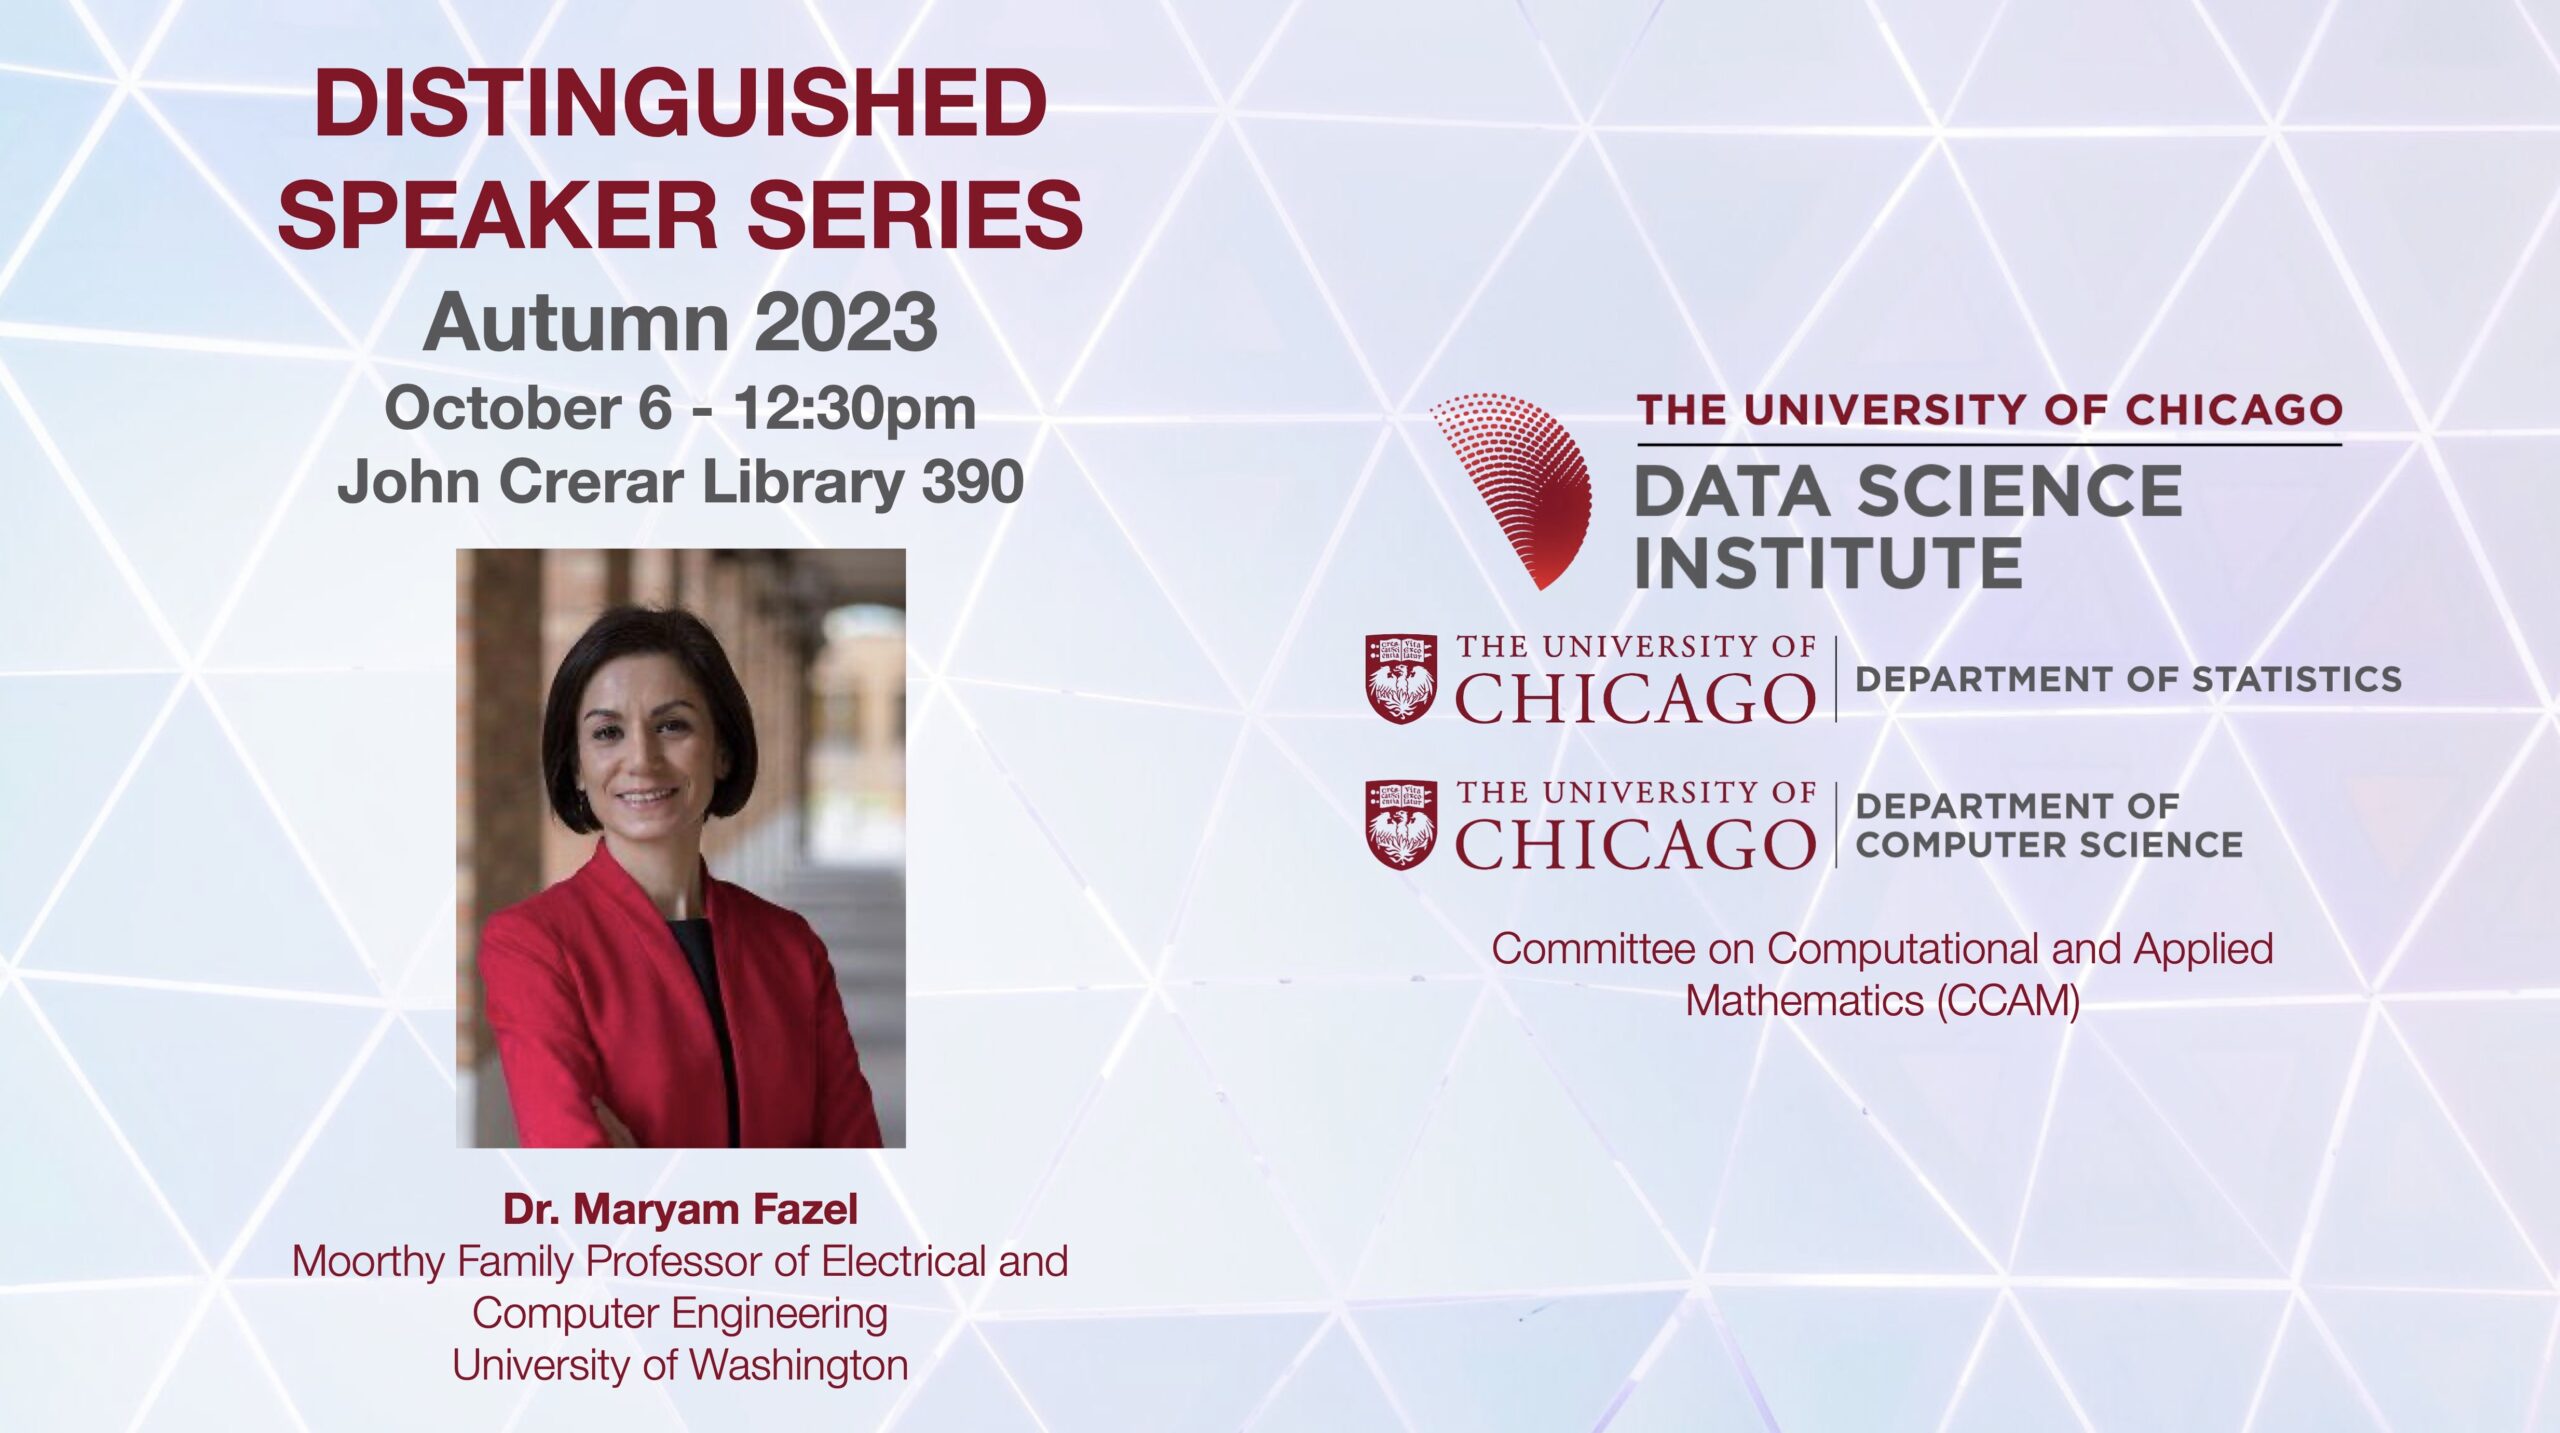 A headshot of Maryam Fazel is accompanied by text describing the Distinguished Speaker Series event: it takes place at 12:30pm in John Crerar Library Room 390.